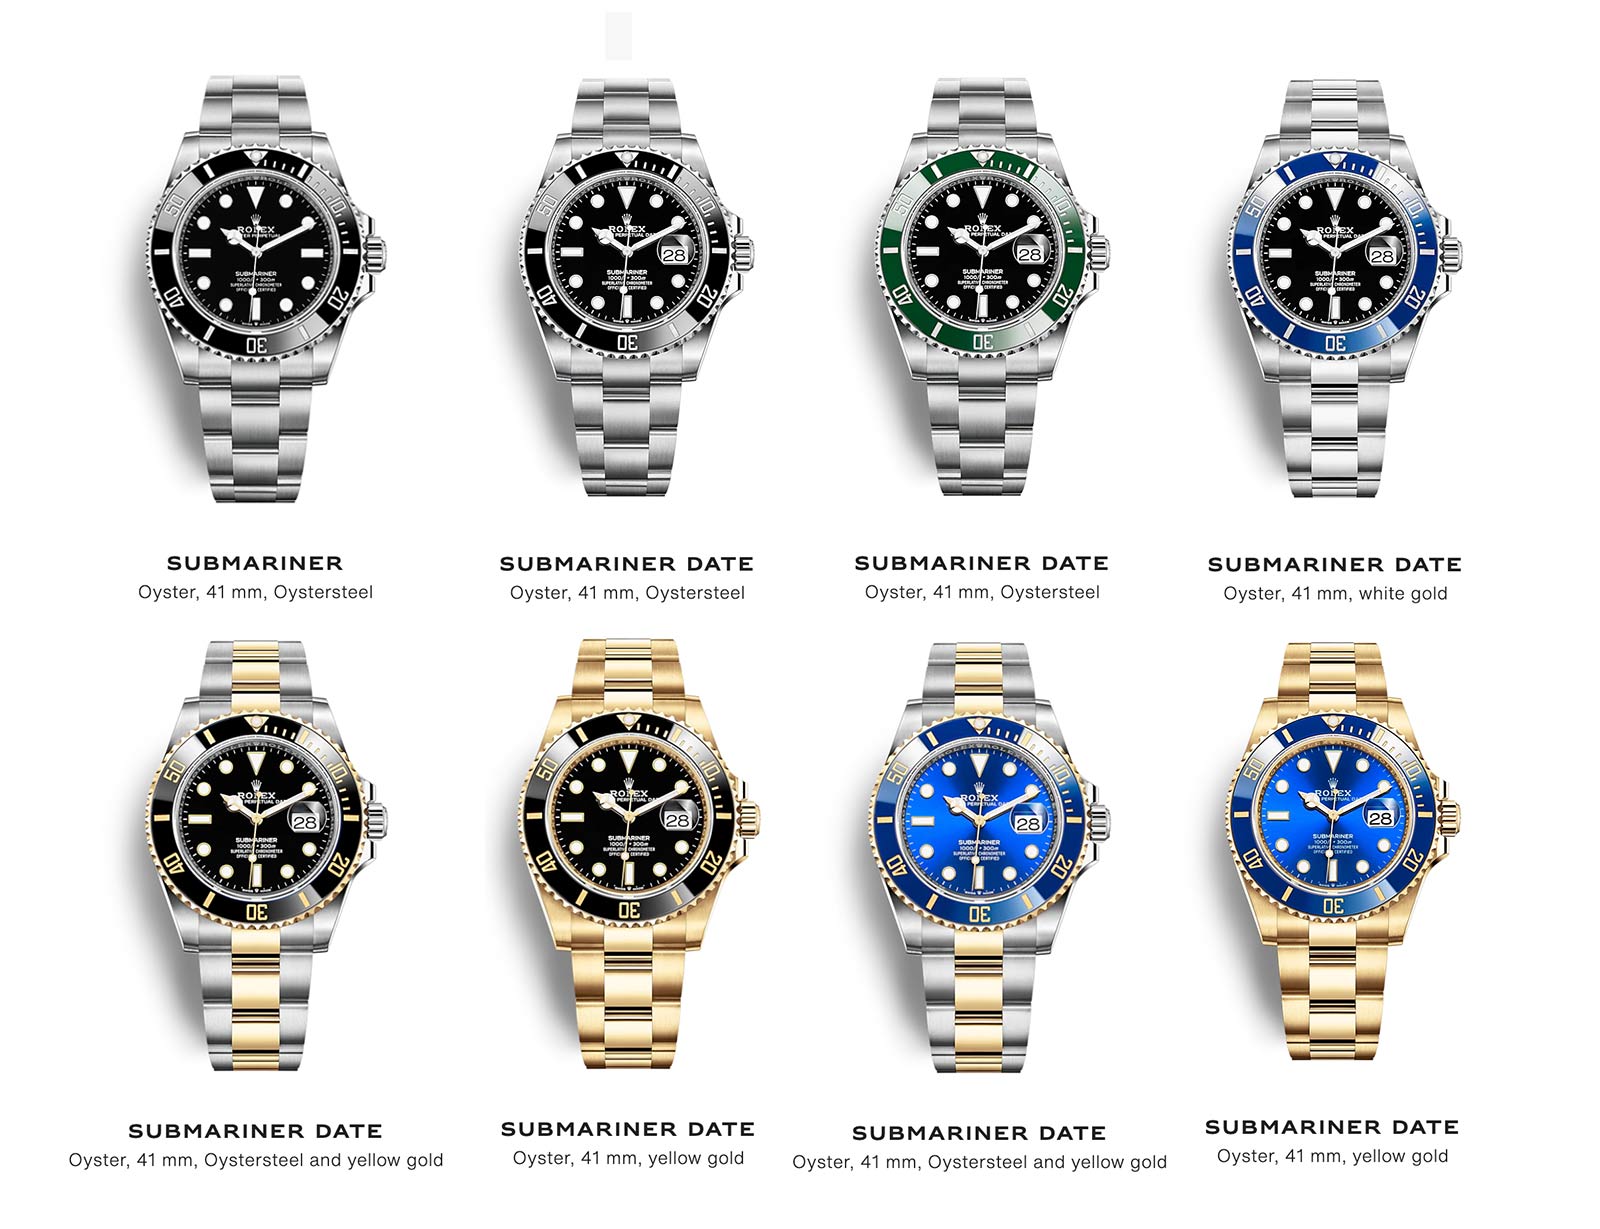 Rolex - Submariner 124060, 126610LN and 126610LV, the new 2020 models ...